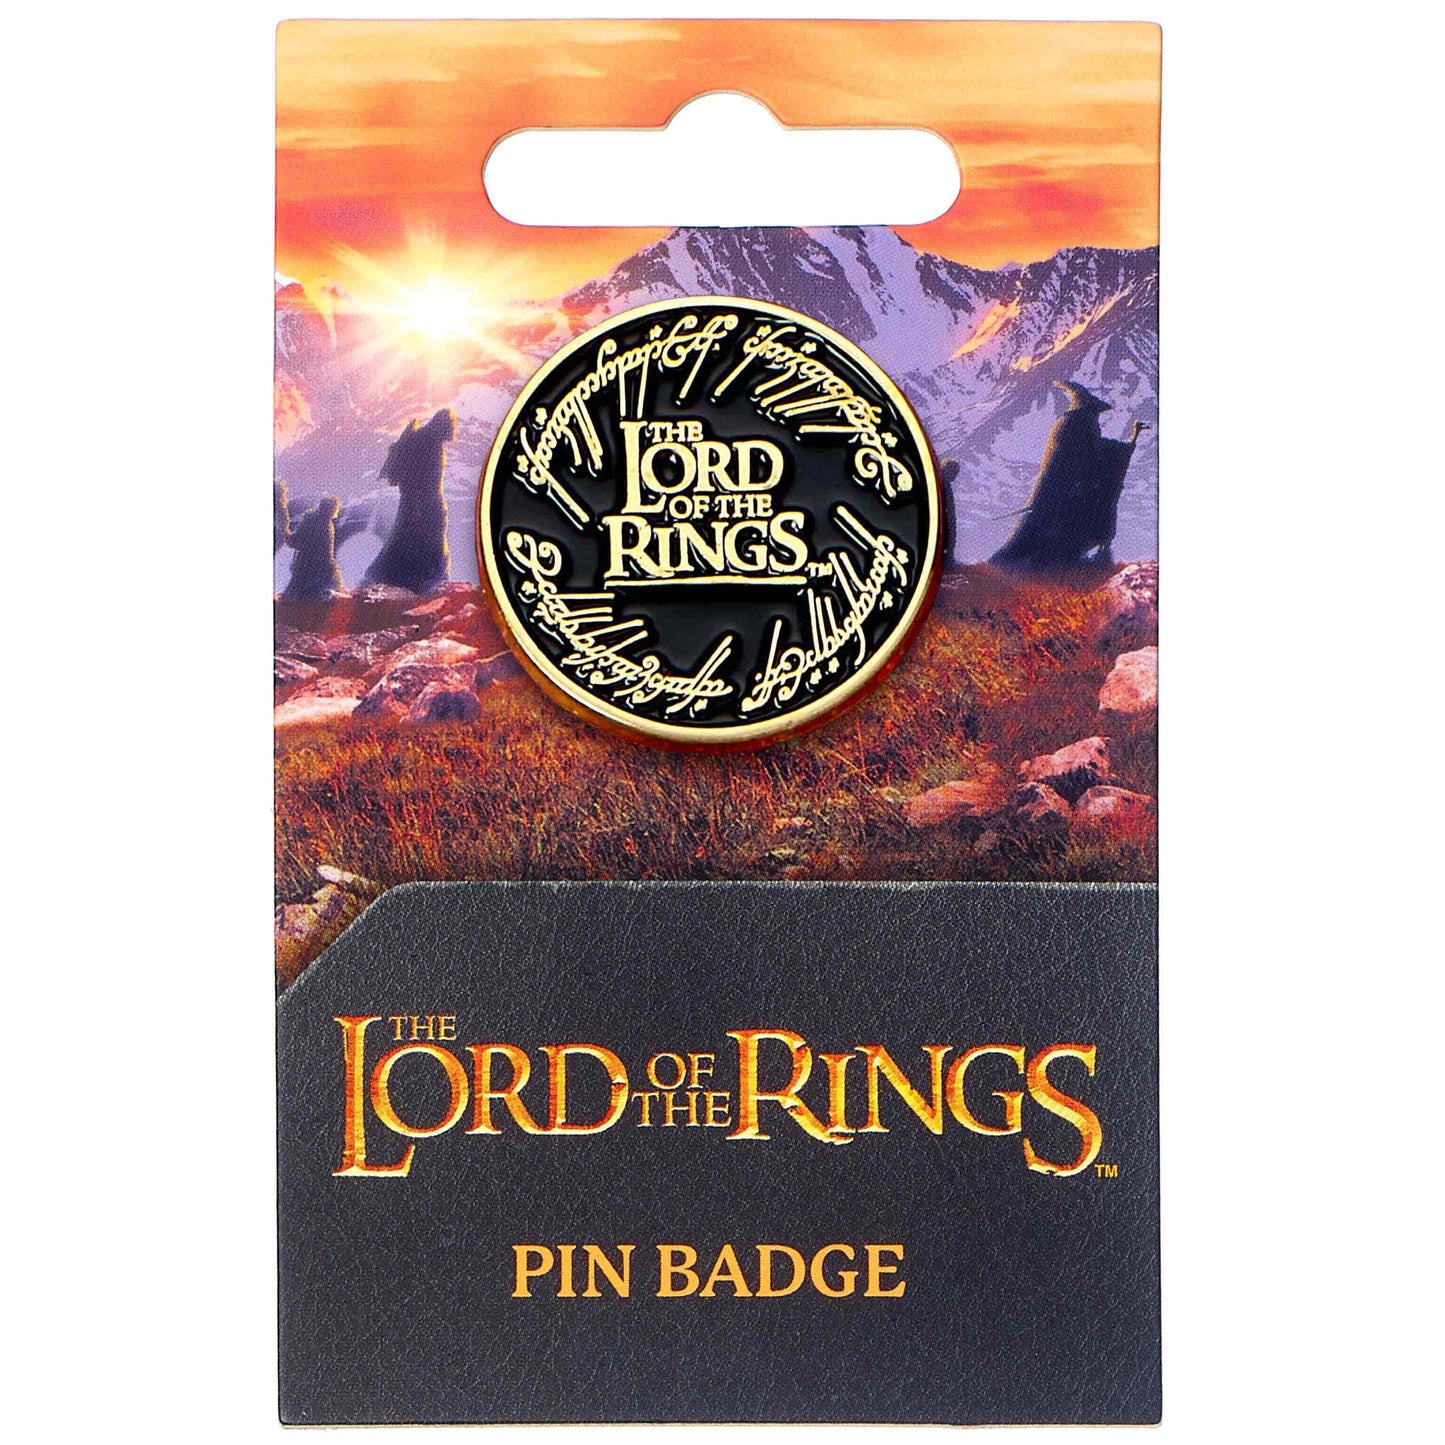 The Lord of The Rings Logo Pinbadge